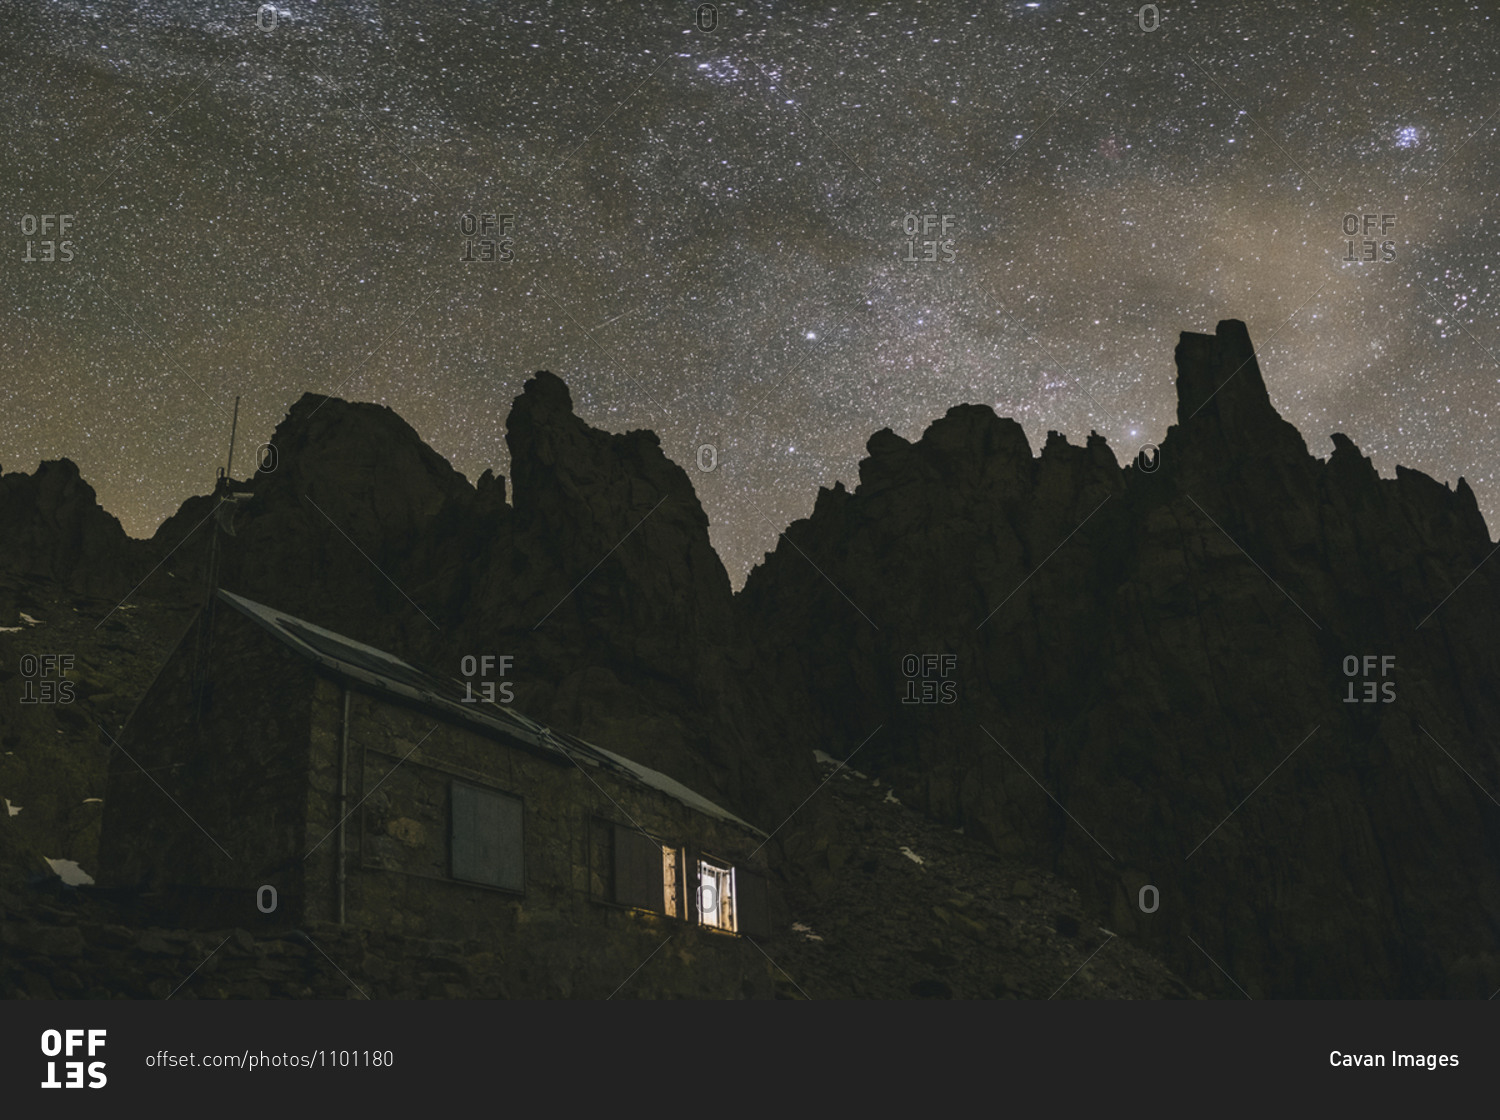 Galayos refuge against granite spikes and Milky Way during a winter night, Gredos, Spain